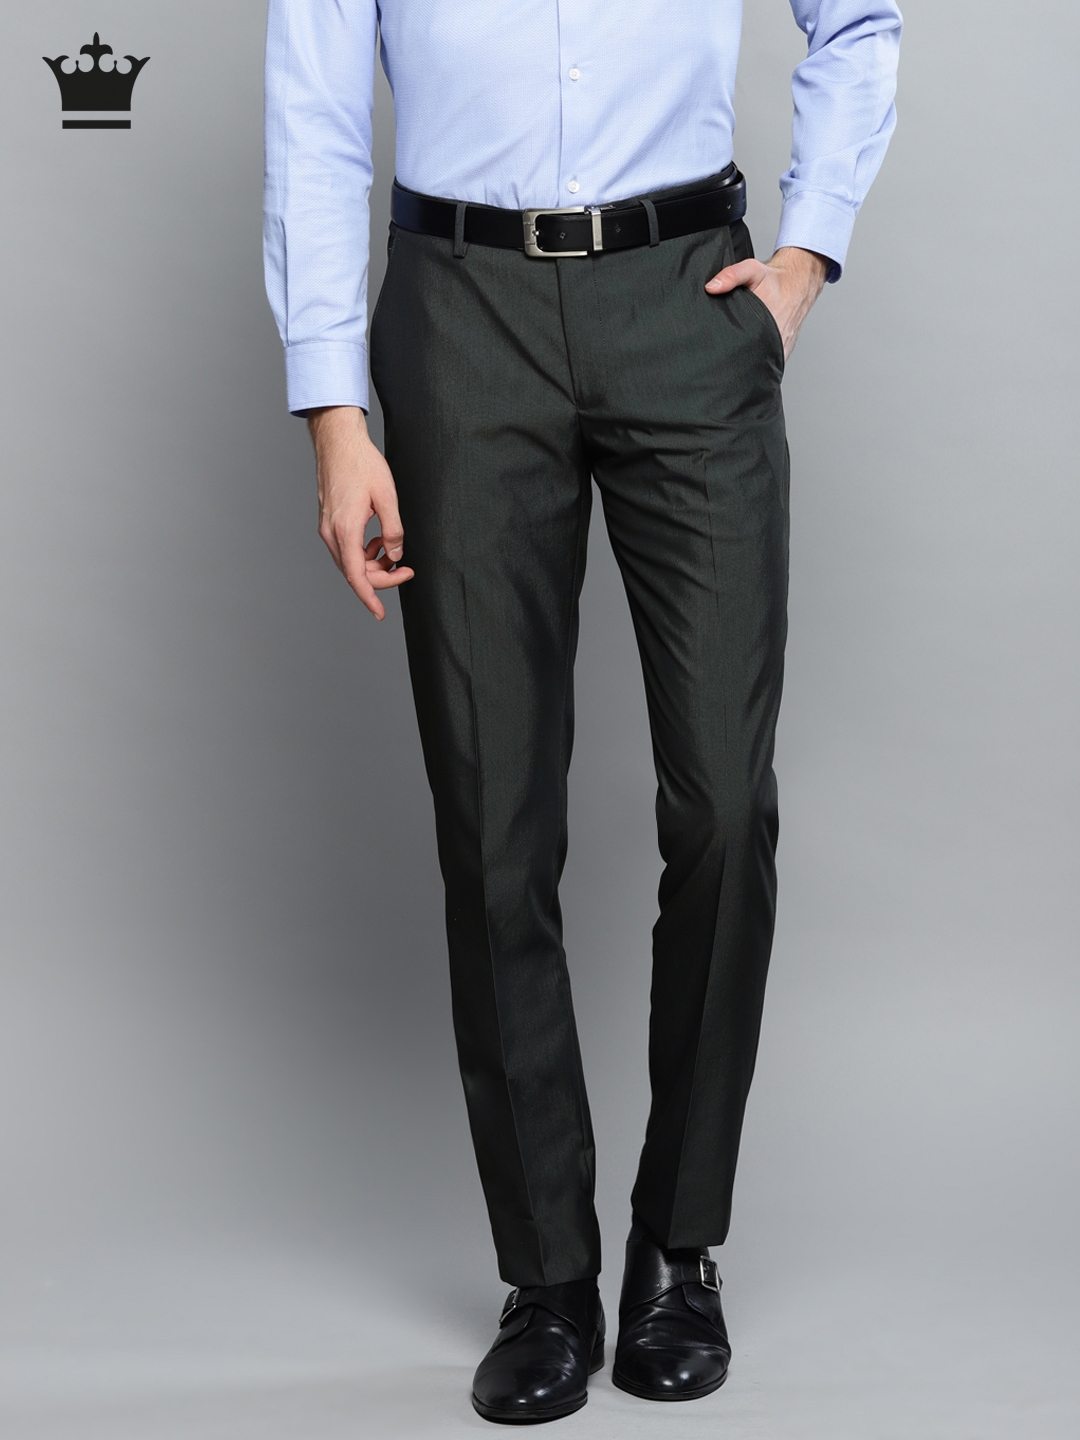 Buy Raymond Black Trousers online in India